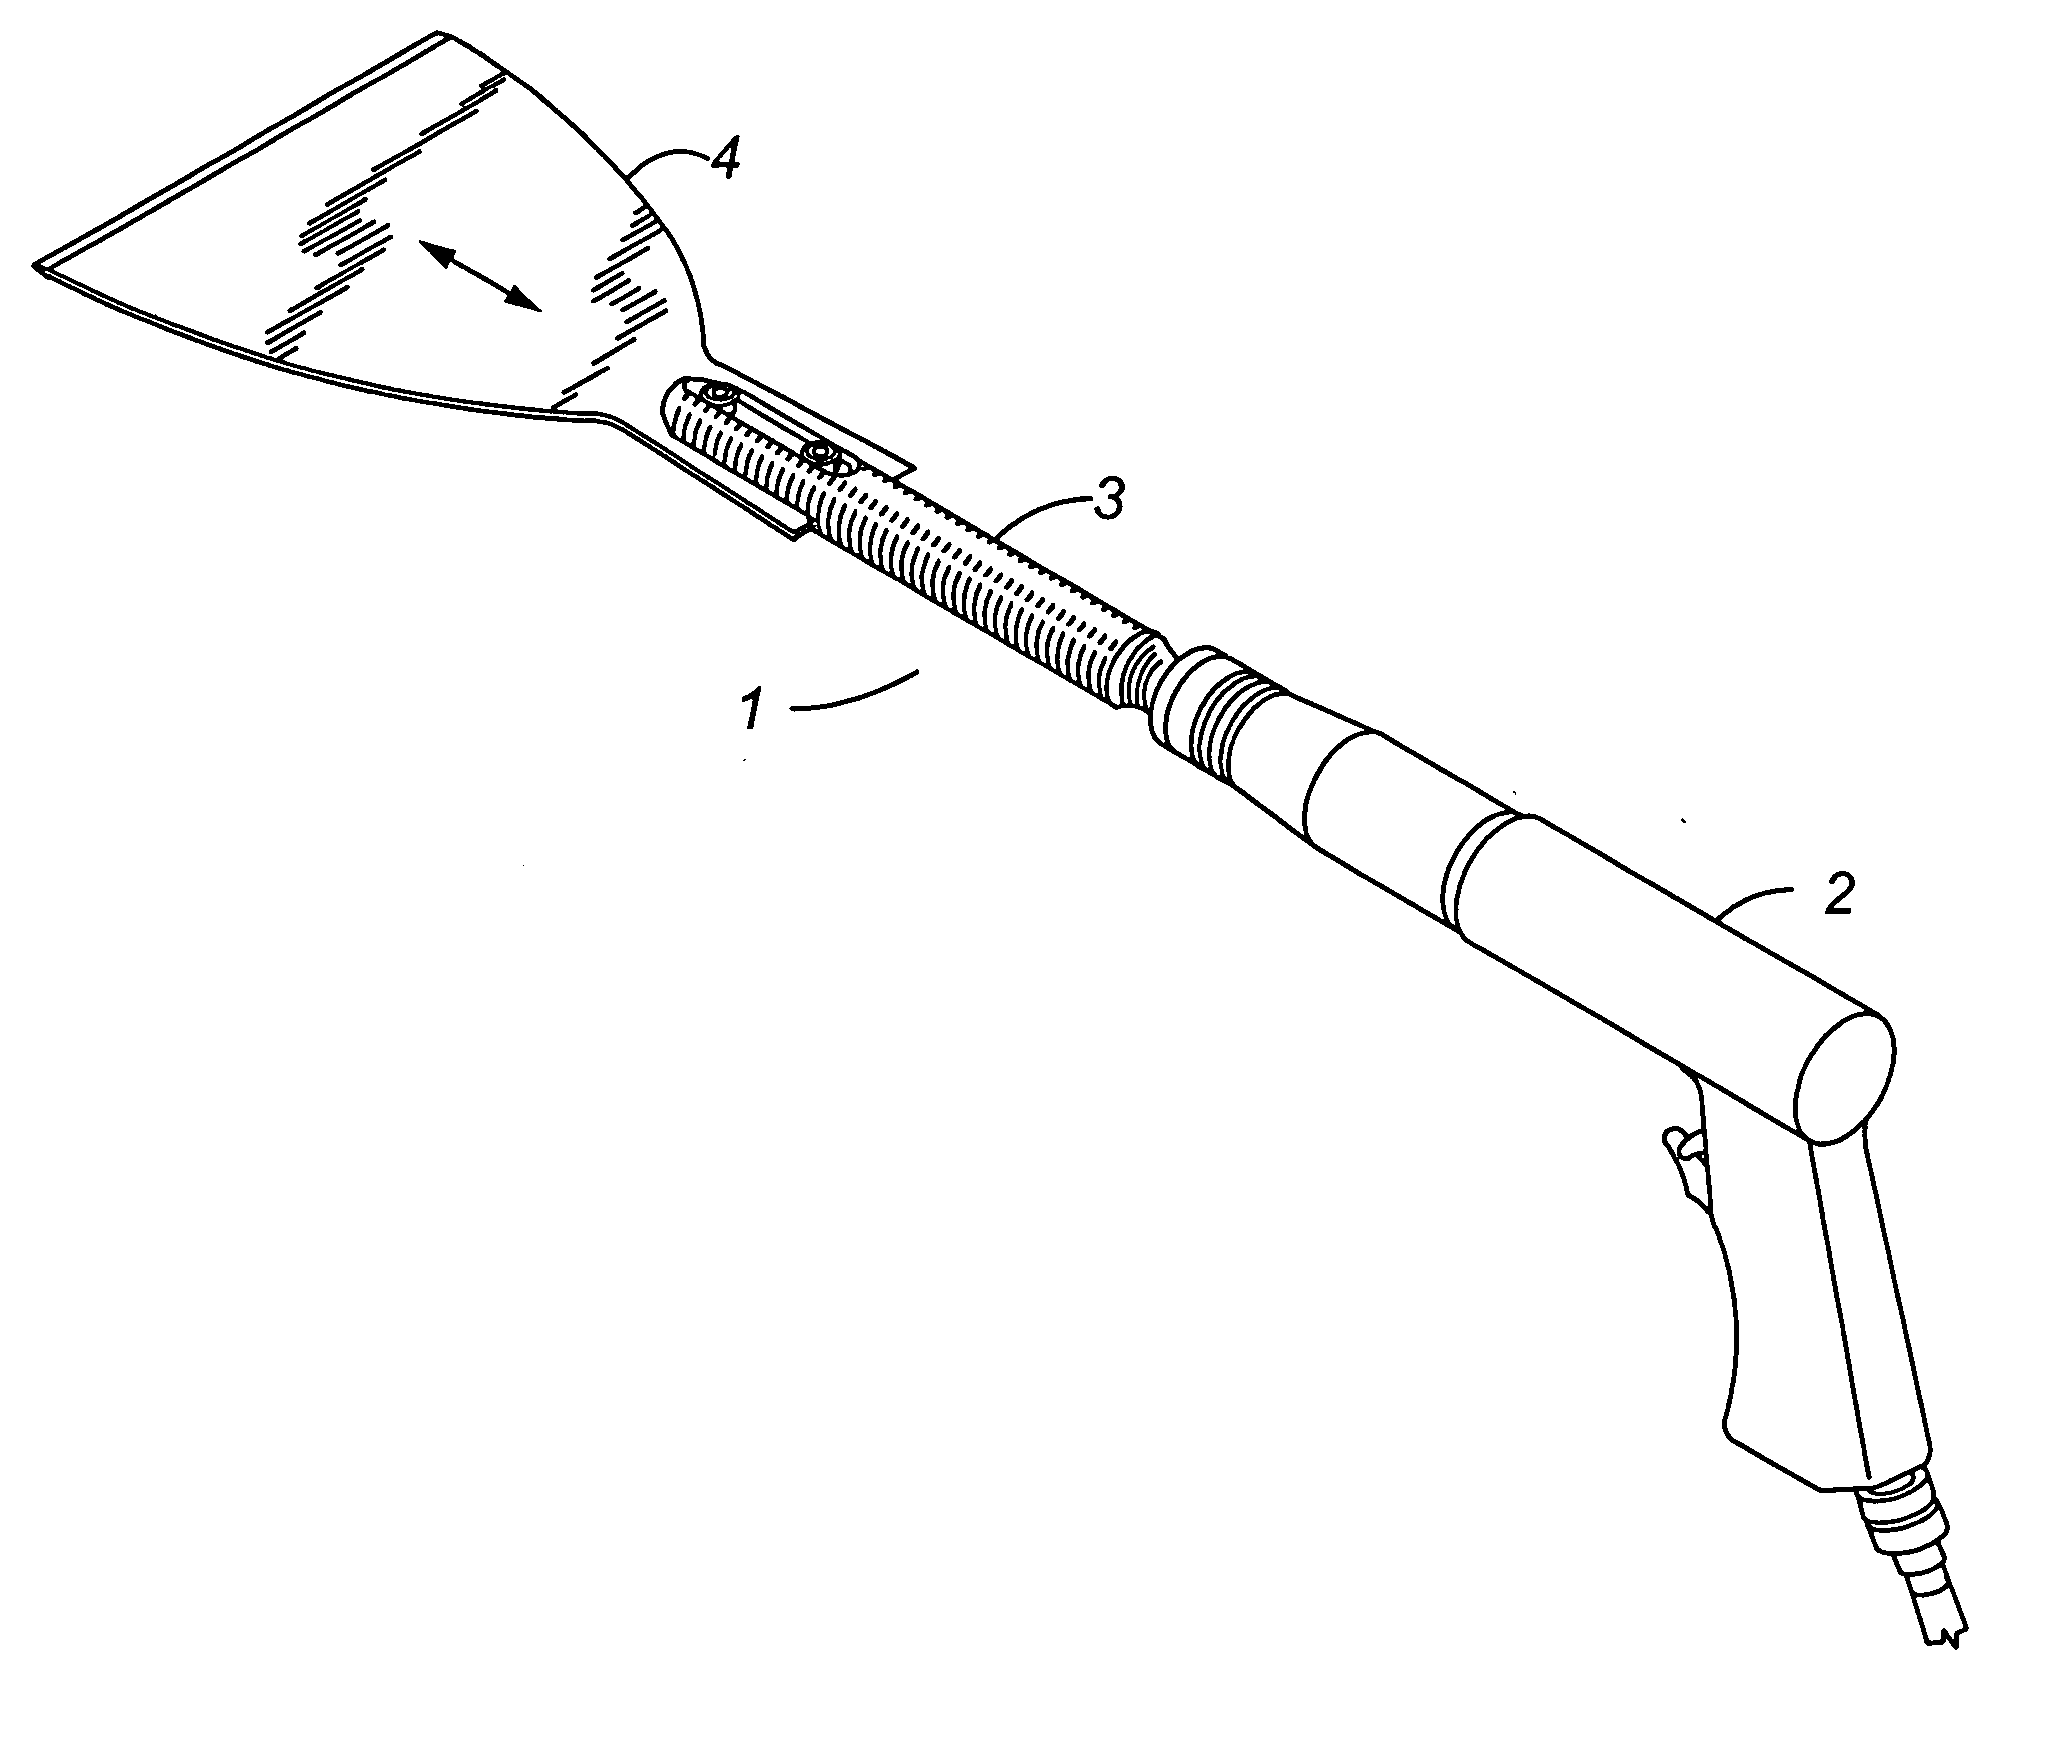 Cutting assembly for removing a windshield and method relating to same